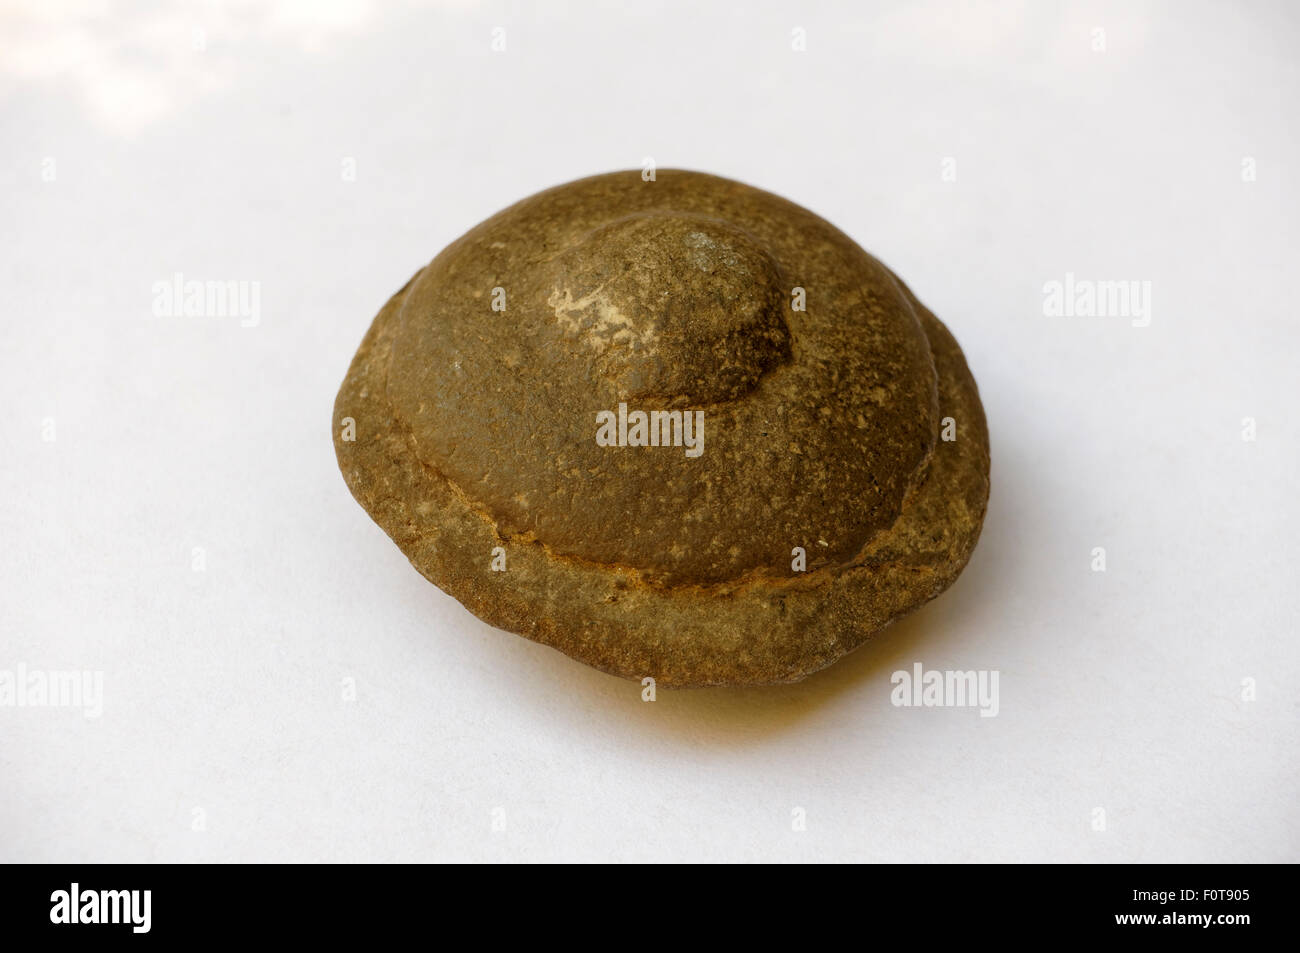 Side view of a small disc-shaped concretion from the province of Quebec, Canada Stock Photo